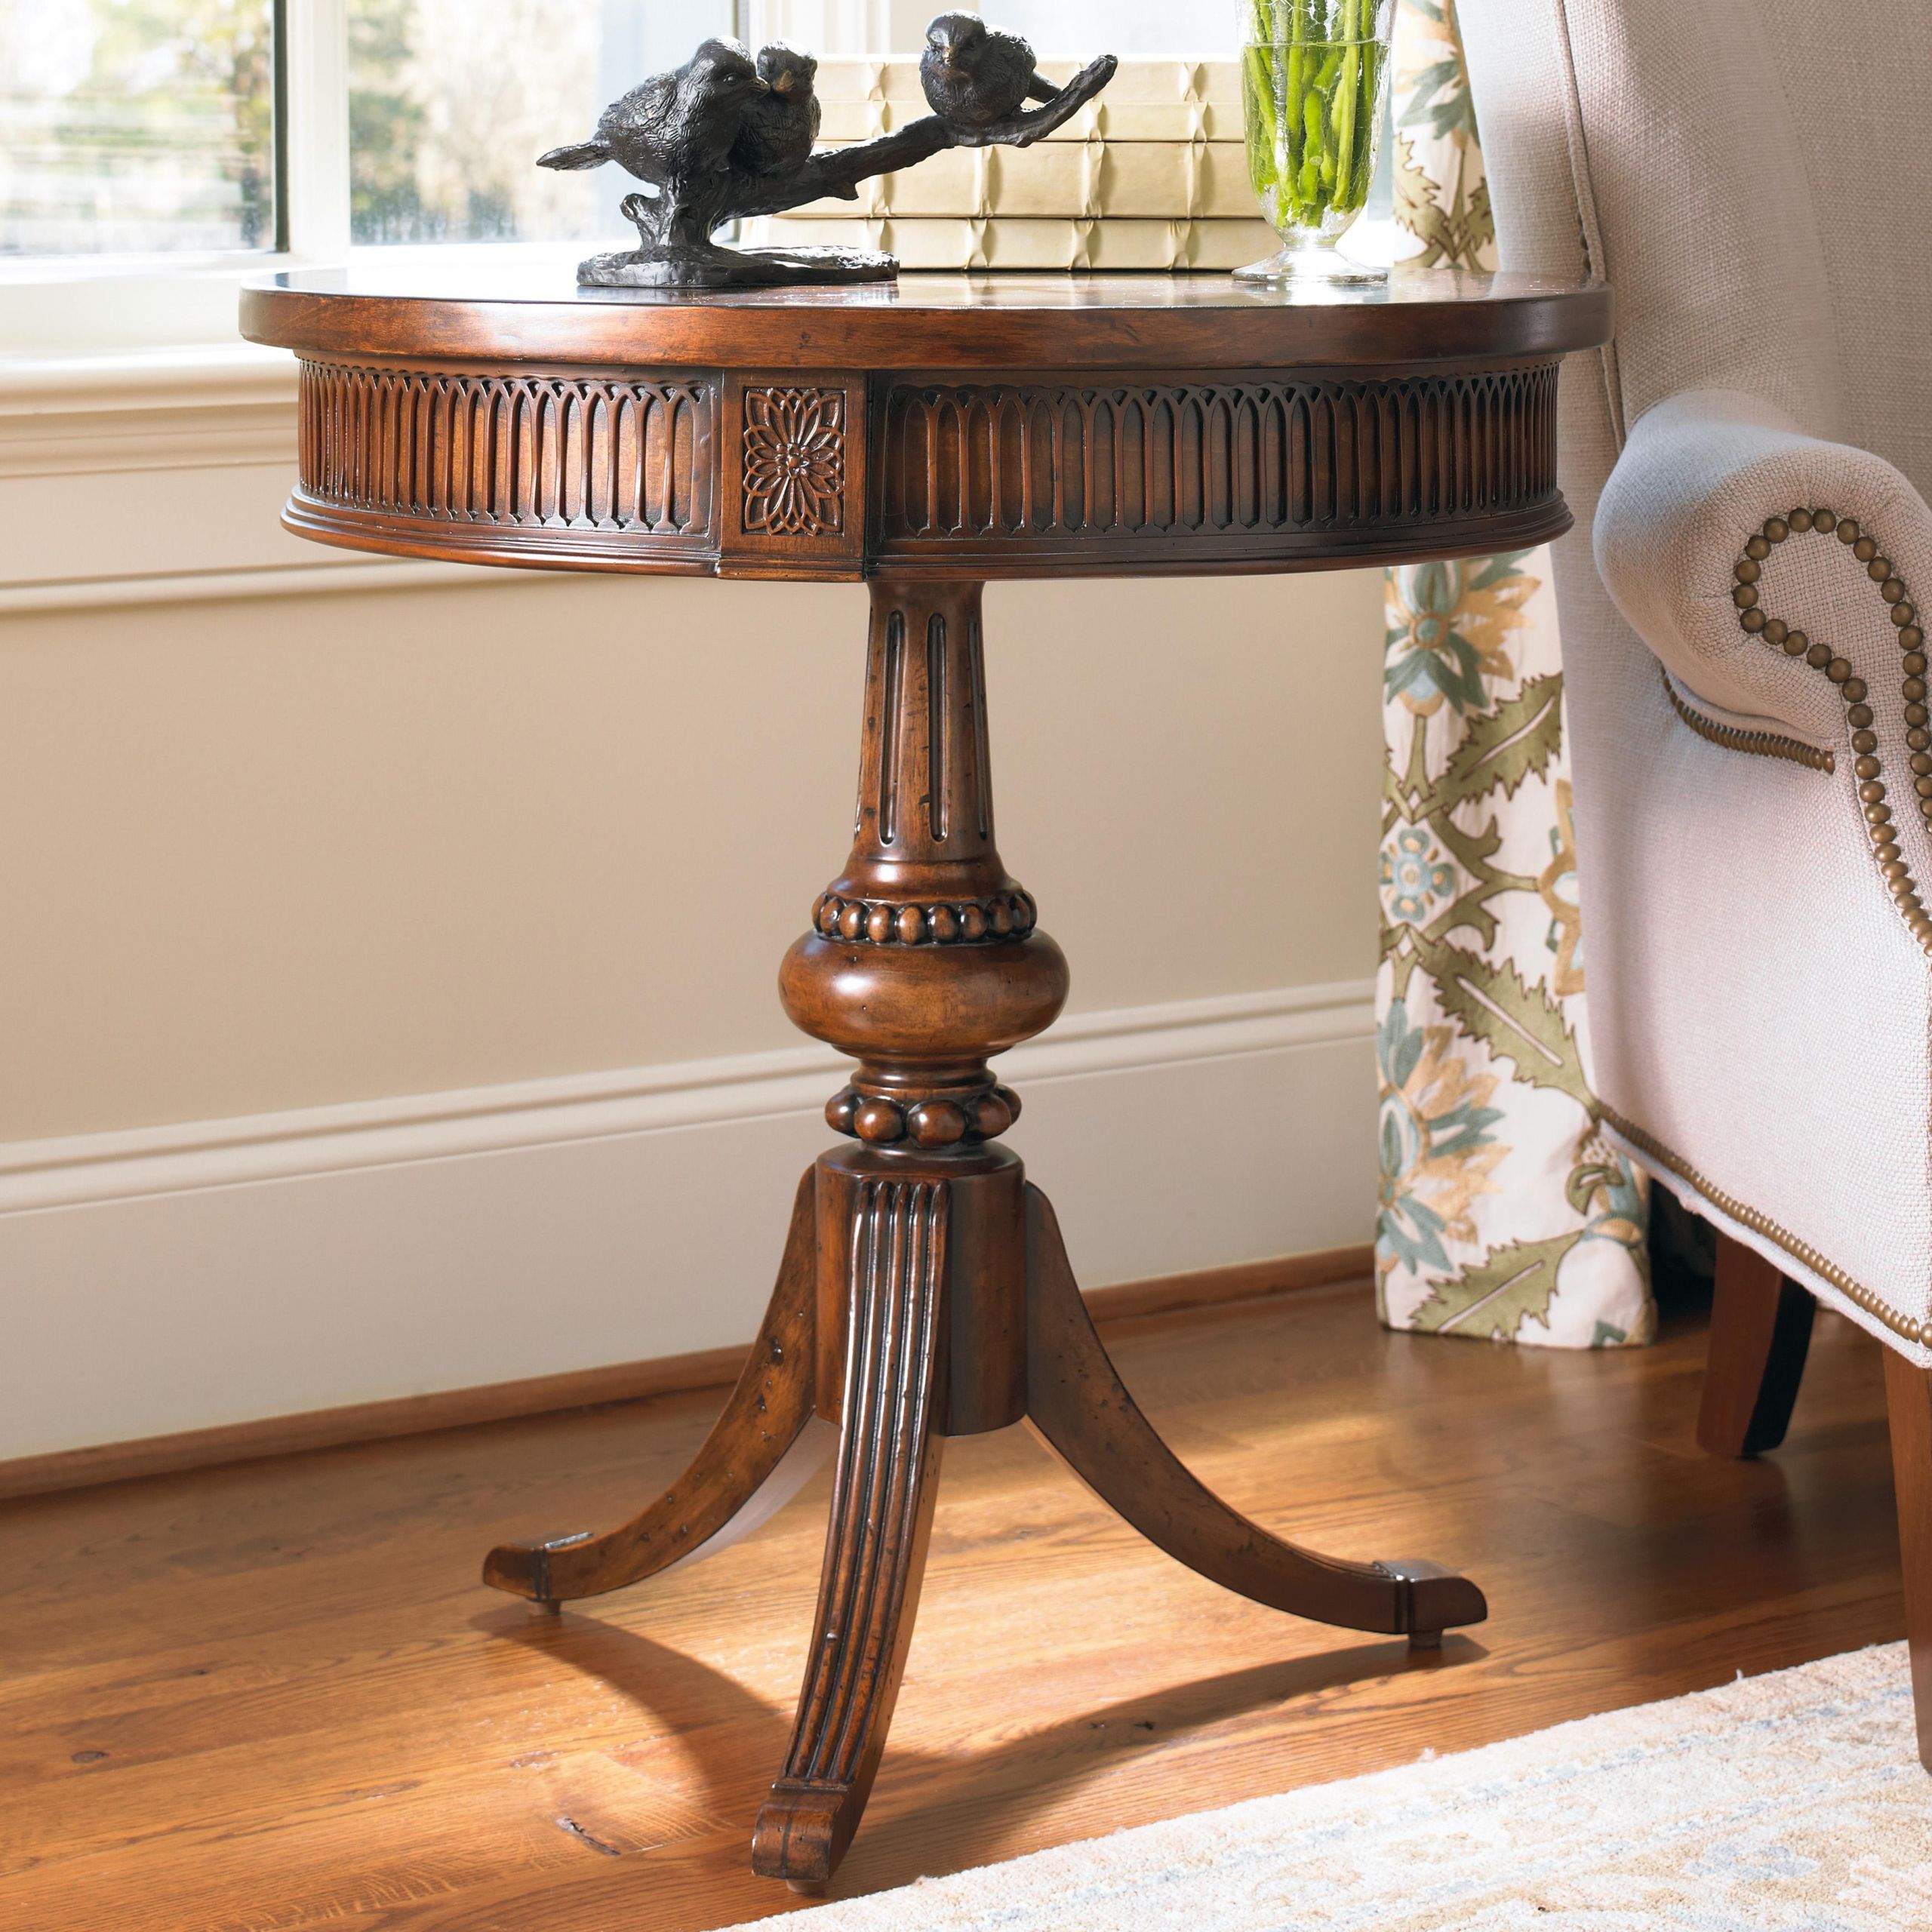 Side Table Living Room
 Hooker Furniture Living Room Accents Round Accent Table